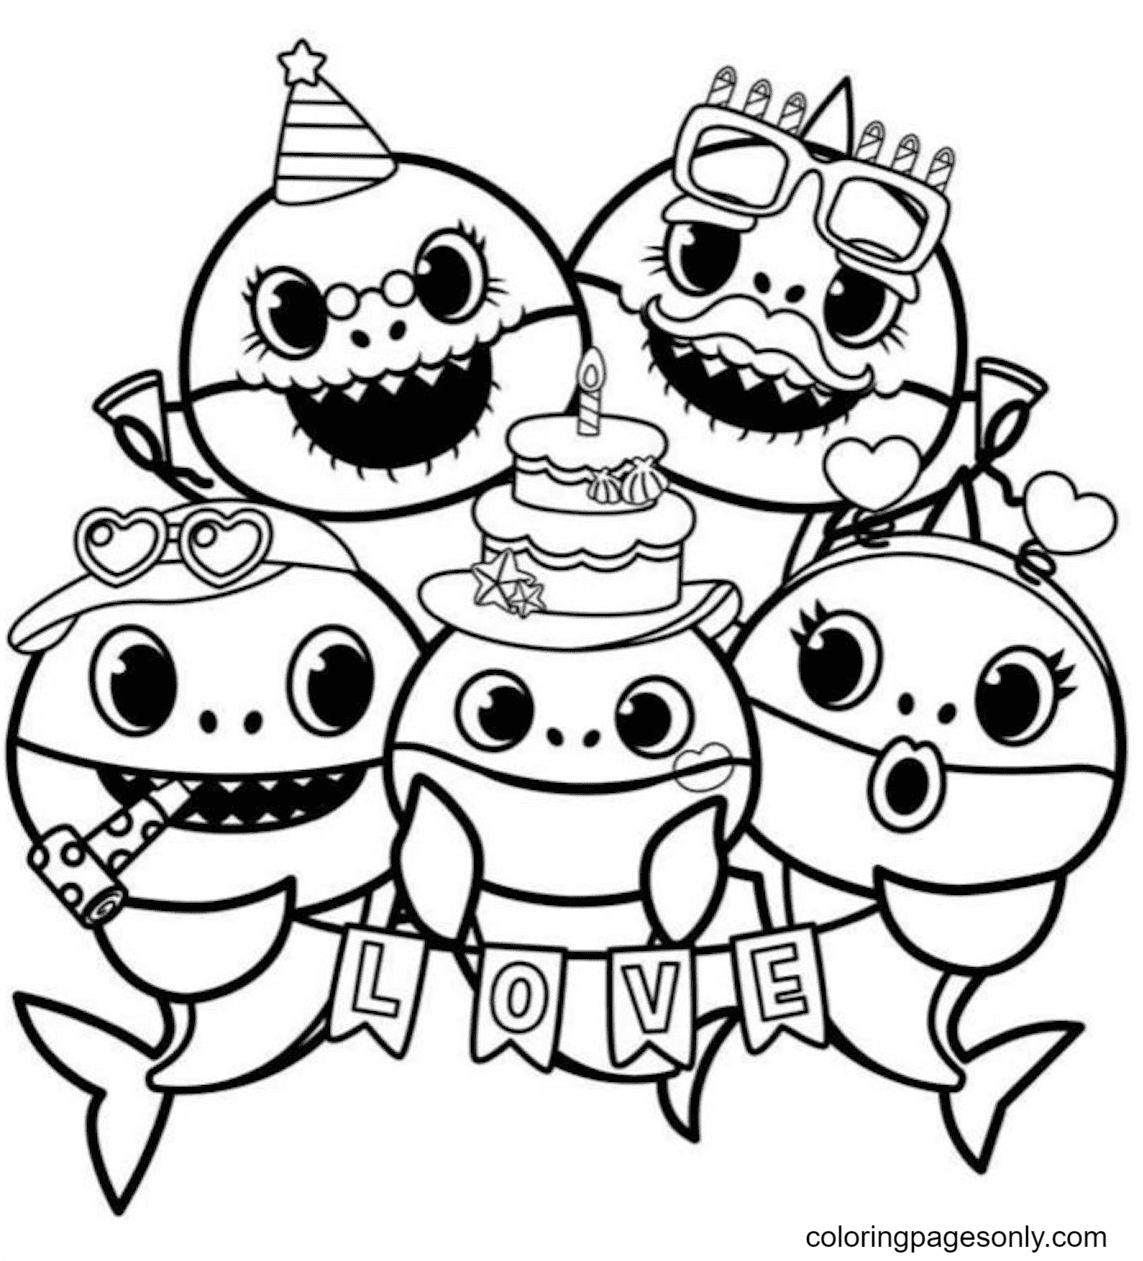 Love Baby Shark Familys Coloring Pages Baby Shark Coloring Pages Coloring Pages For Kids And Adults